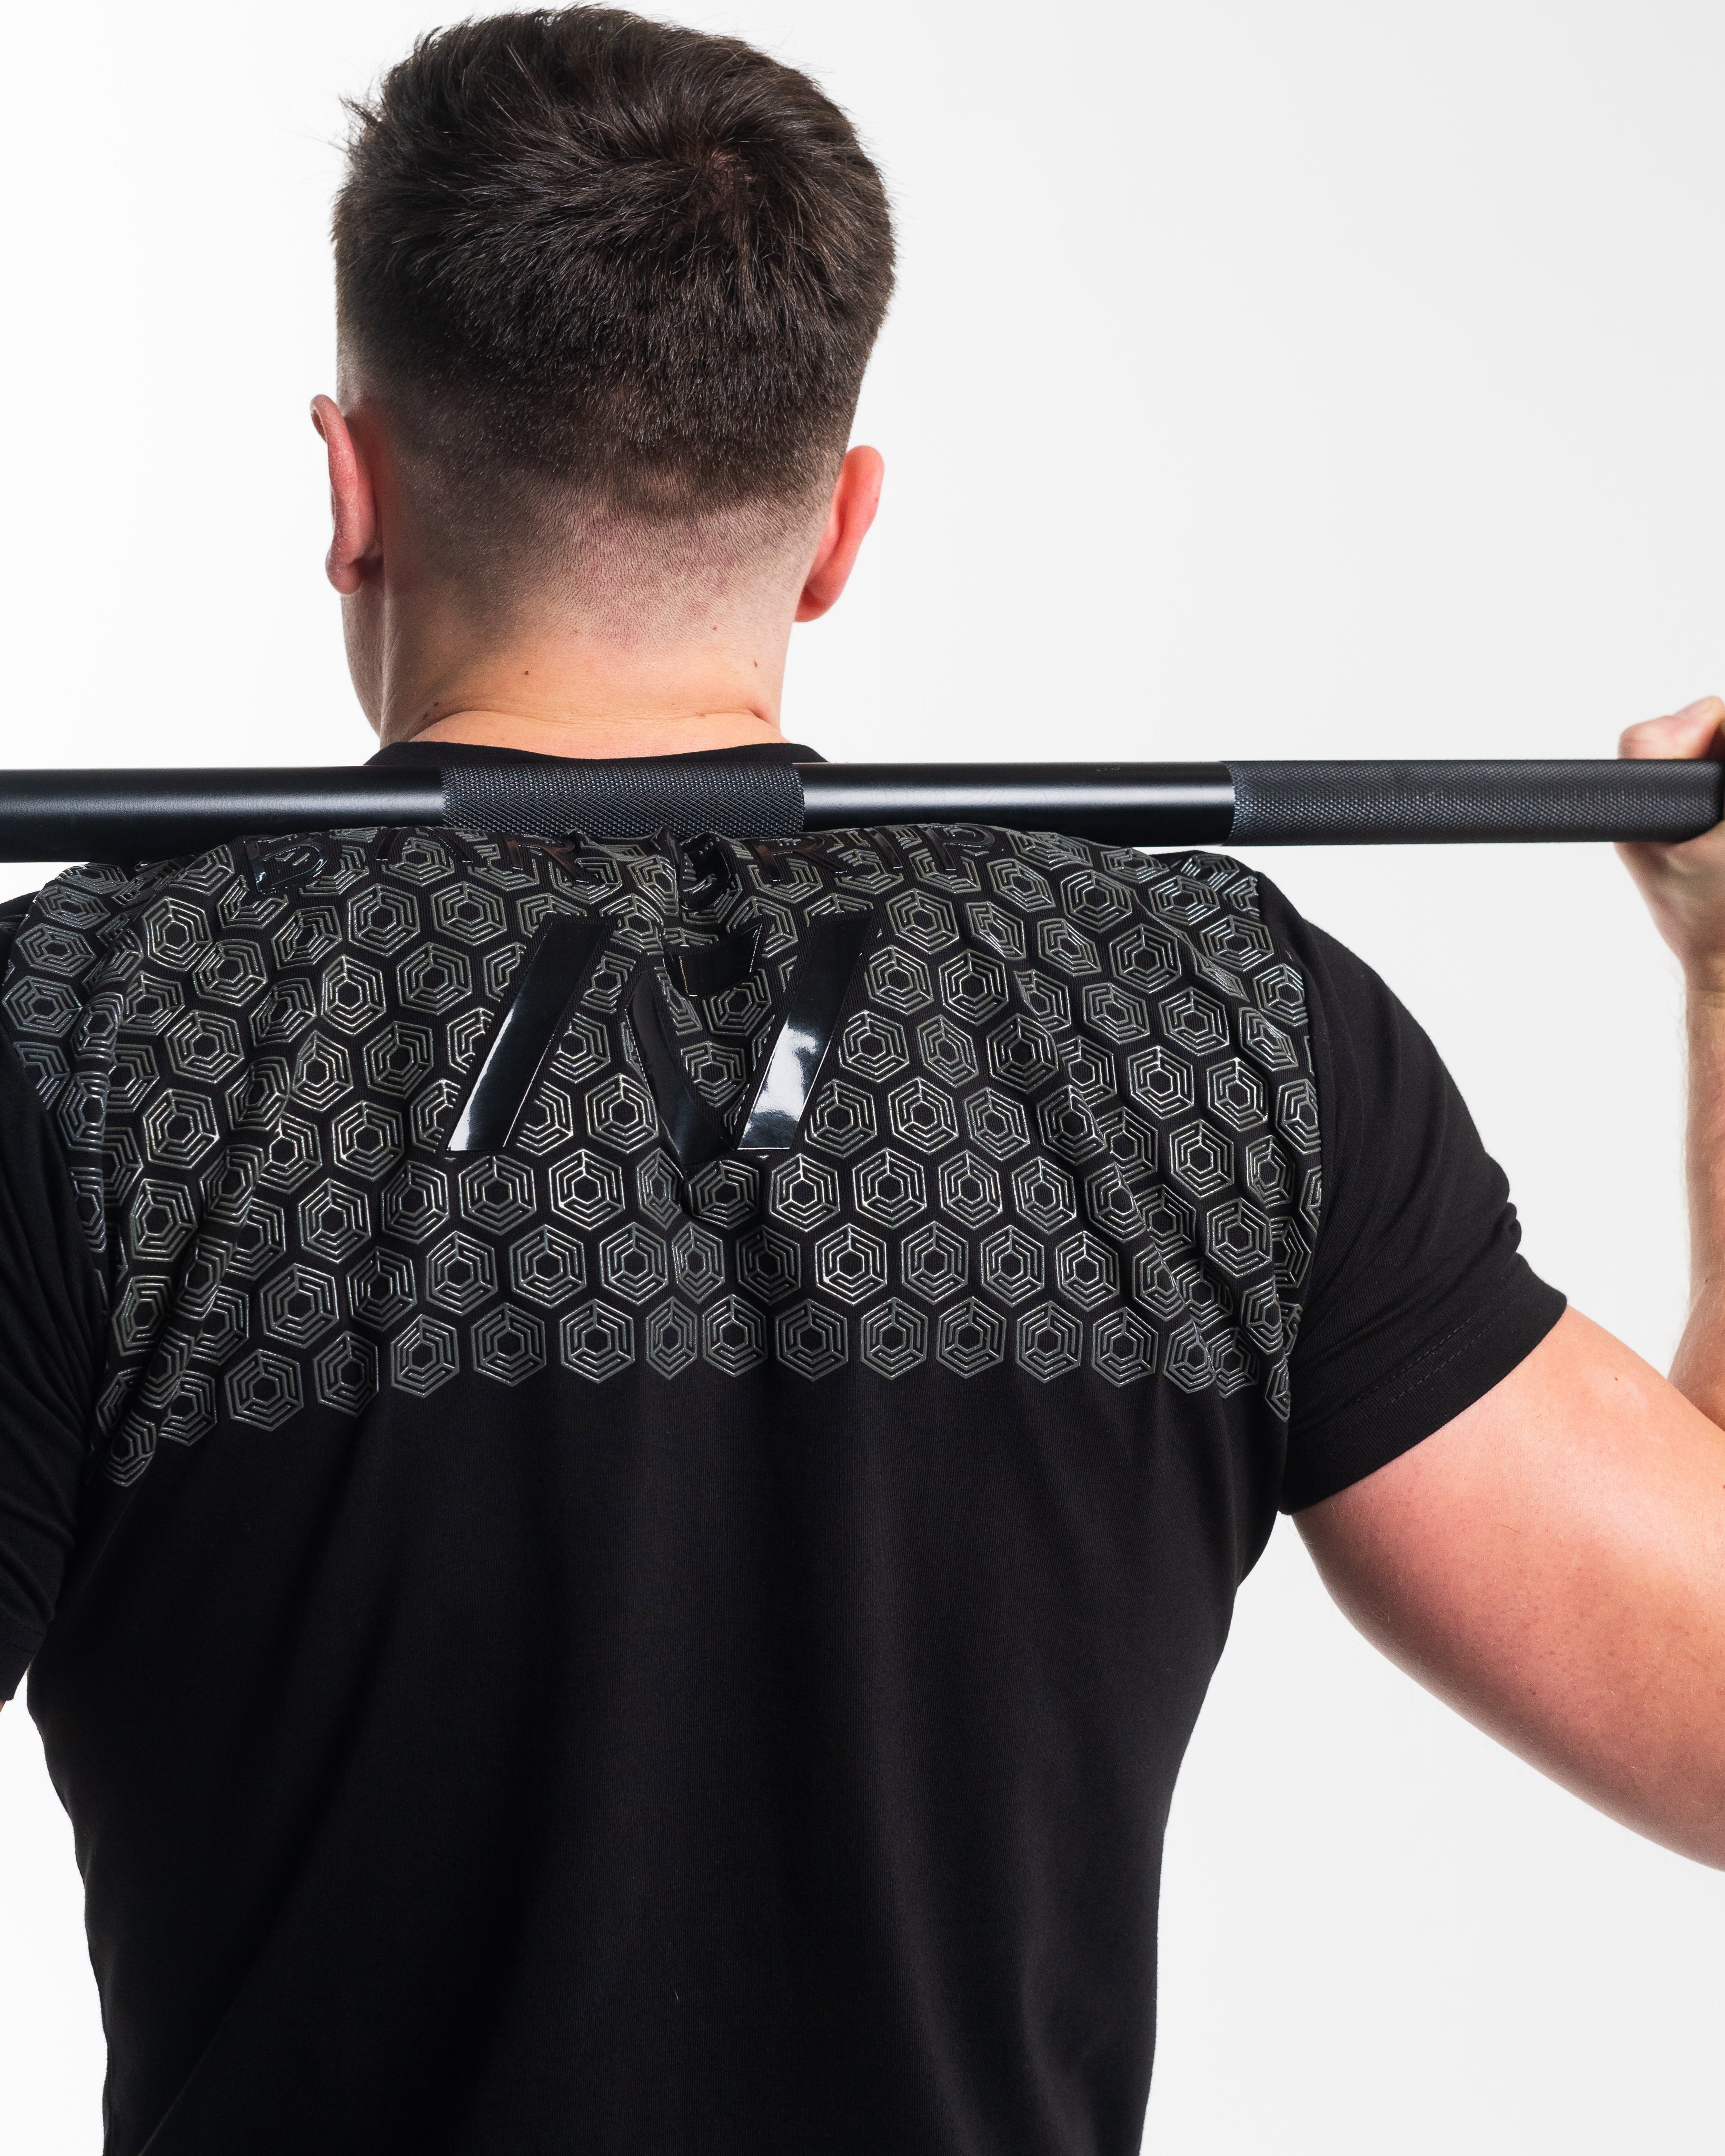 Crest is our classic black on black design. With the Stealth Bar Grip Shirt you can be noticed, yet still, be able to be subtle. The A7 silicone bar grip helps with slippery commercial benches and bars and anchors the barbell to your back. All A7 Powerlifting Equipment shipping to UK, Norway, Switzerland and Iceland.